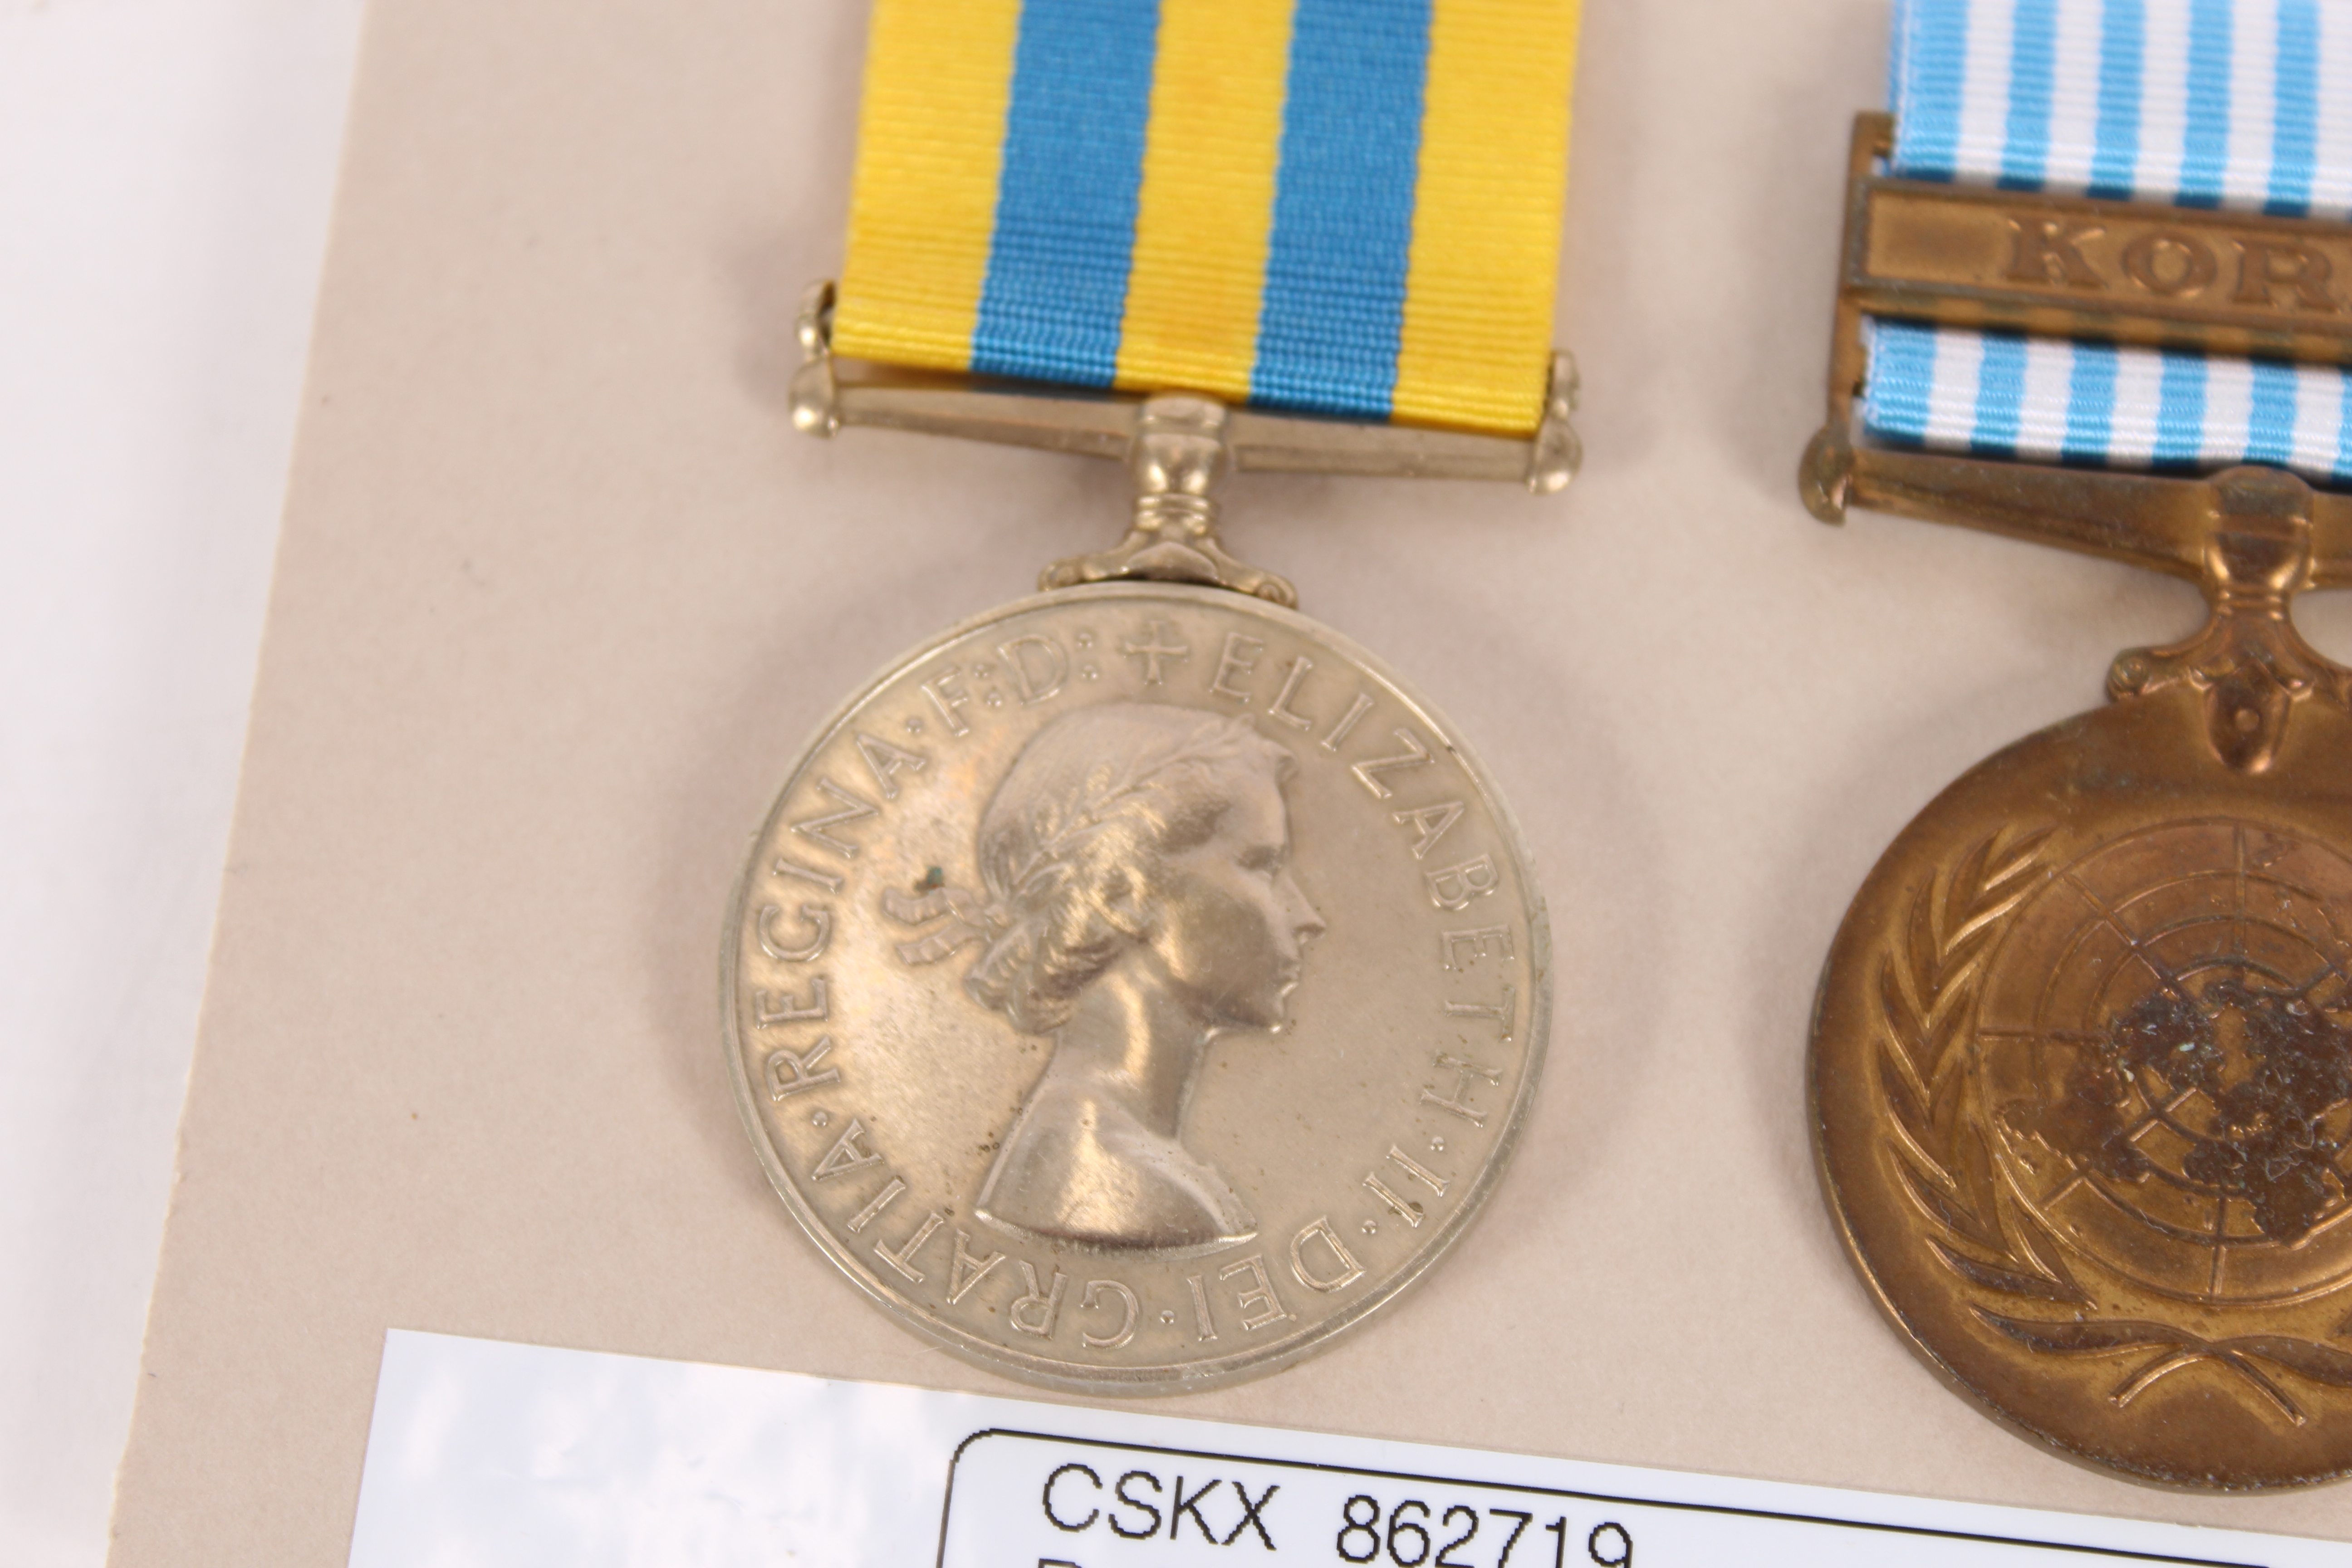 Two Korean medals to CSKX 8622719 D.H. Bowdidge Lm - Image 2 of 5